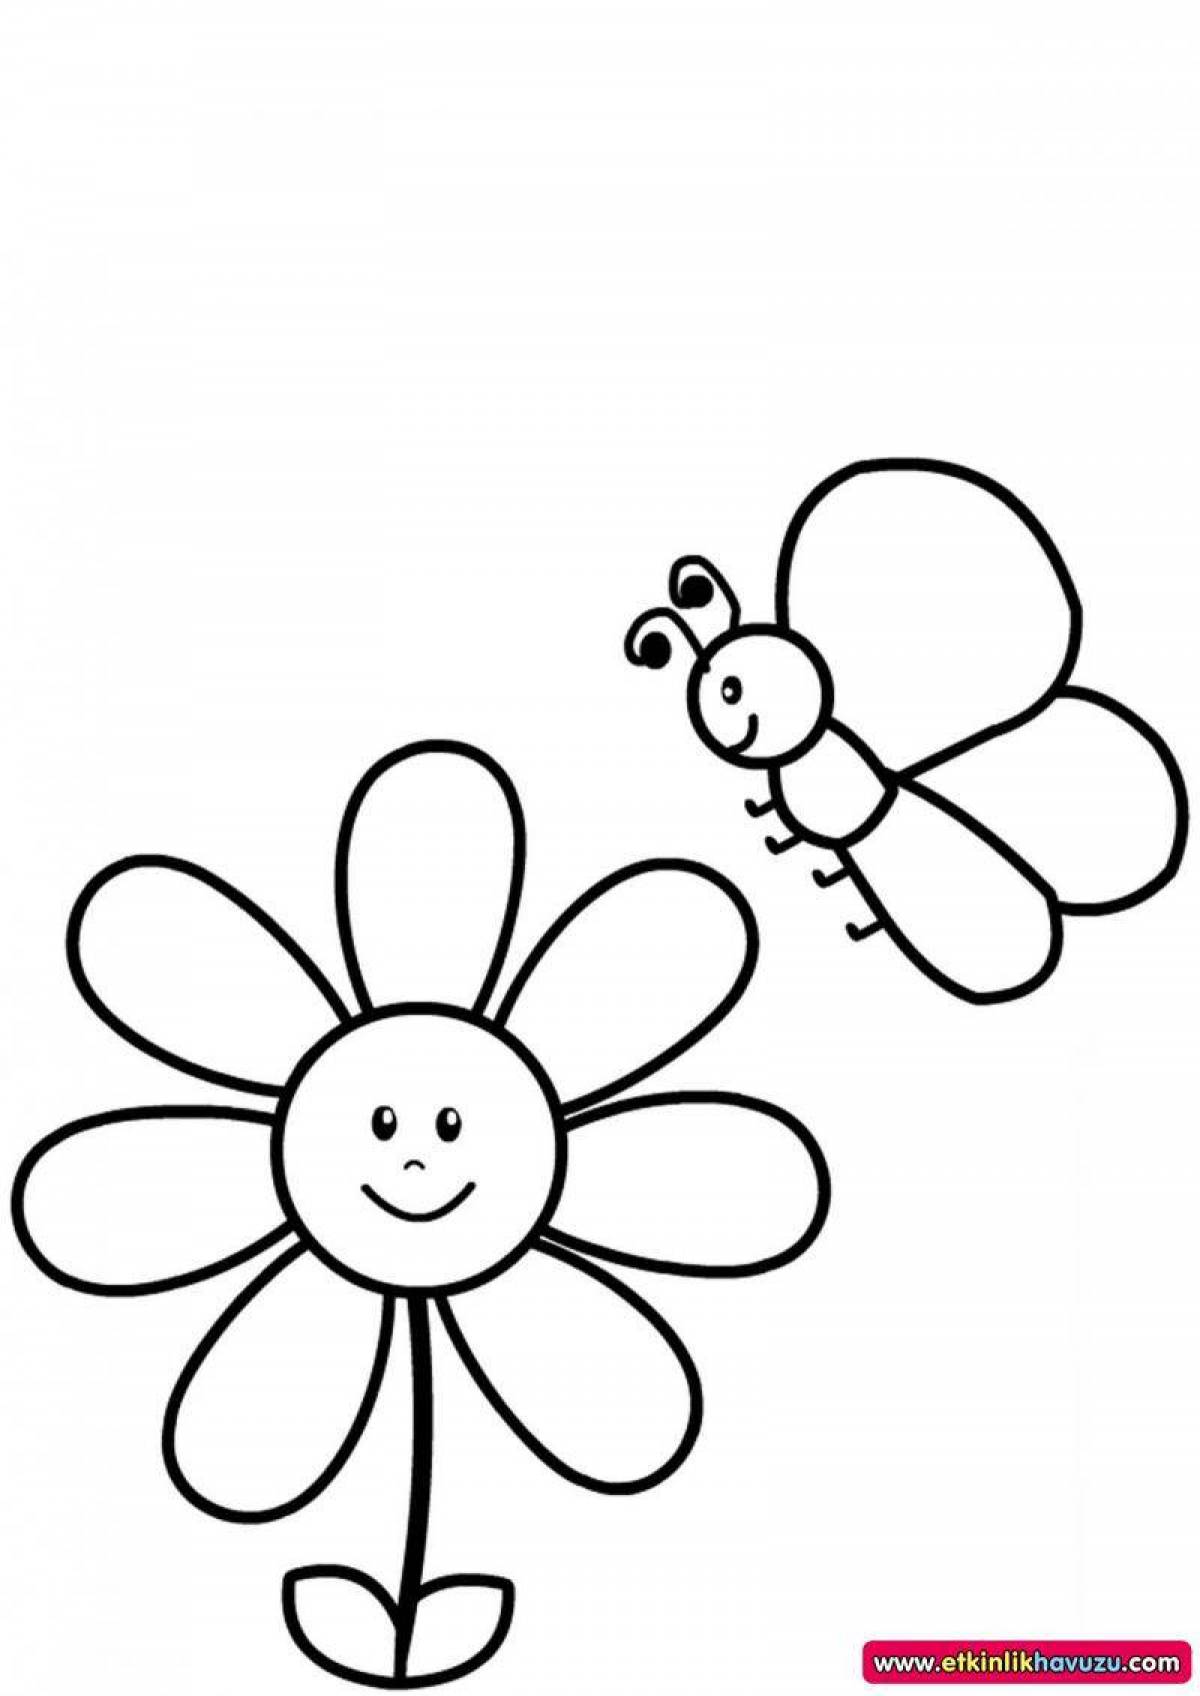 Bright coloring flower for children